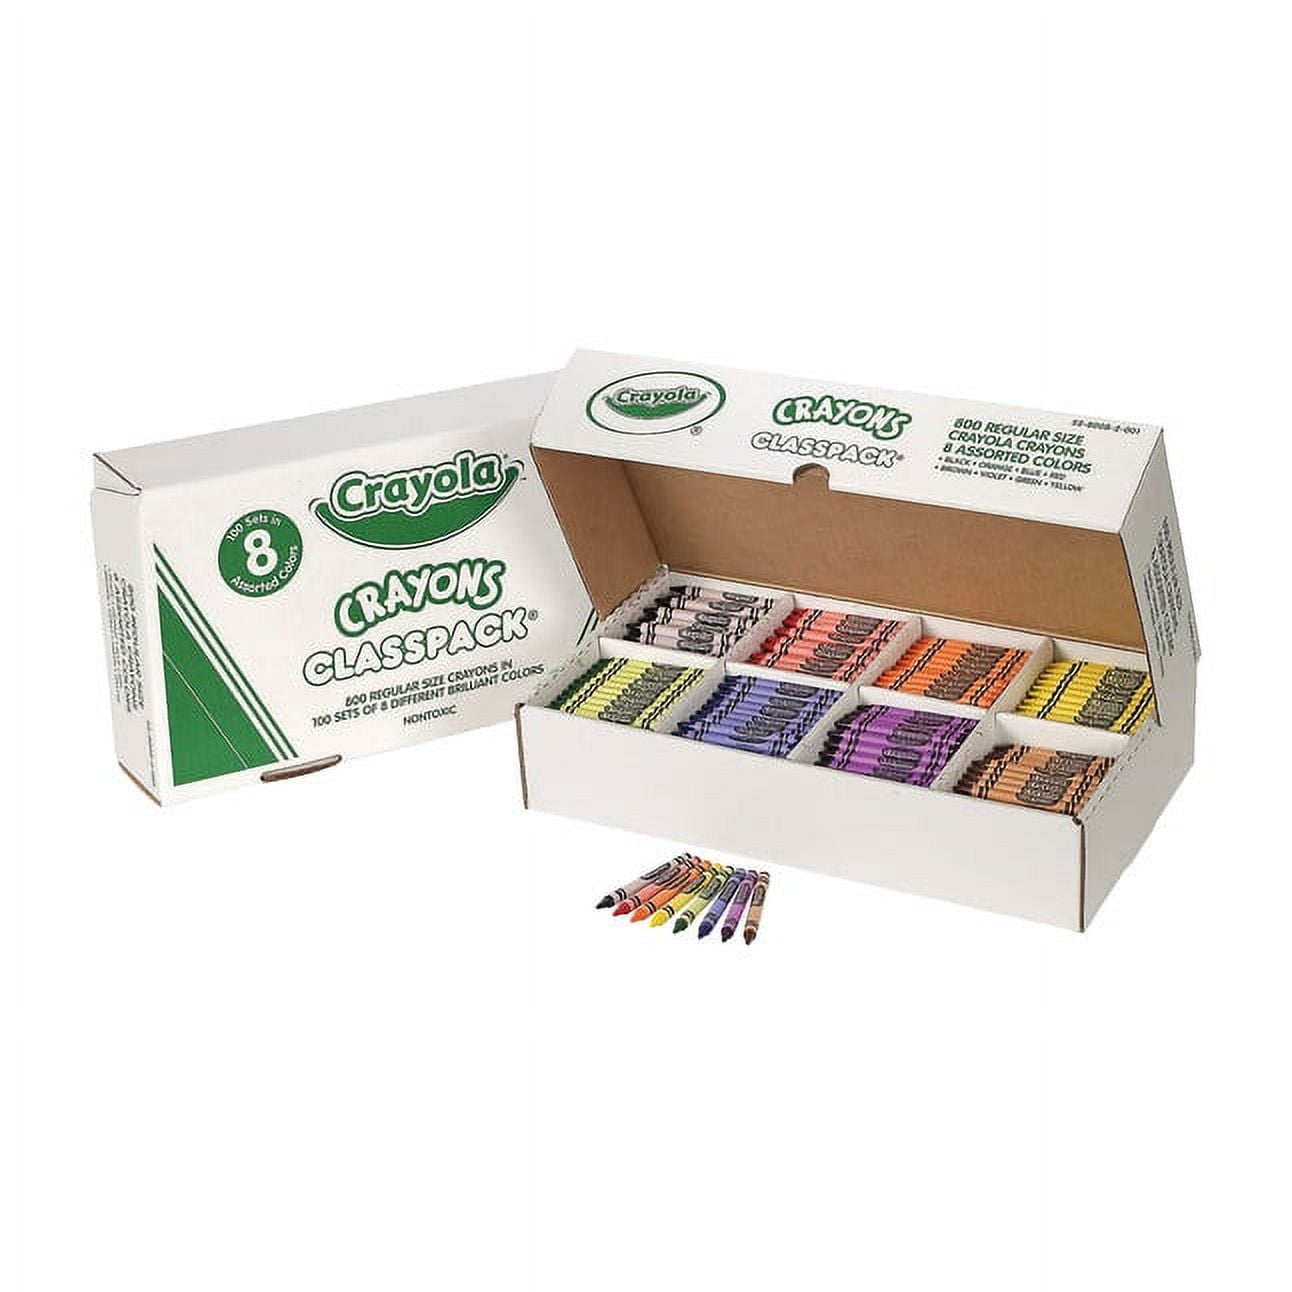 Crayola 30380880 Colors of The World Skin Tone Crayons, 24 Count